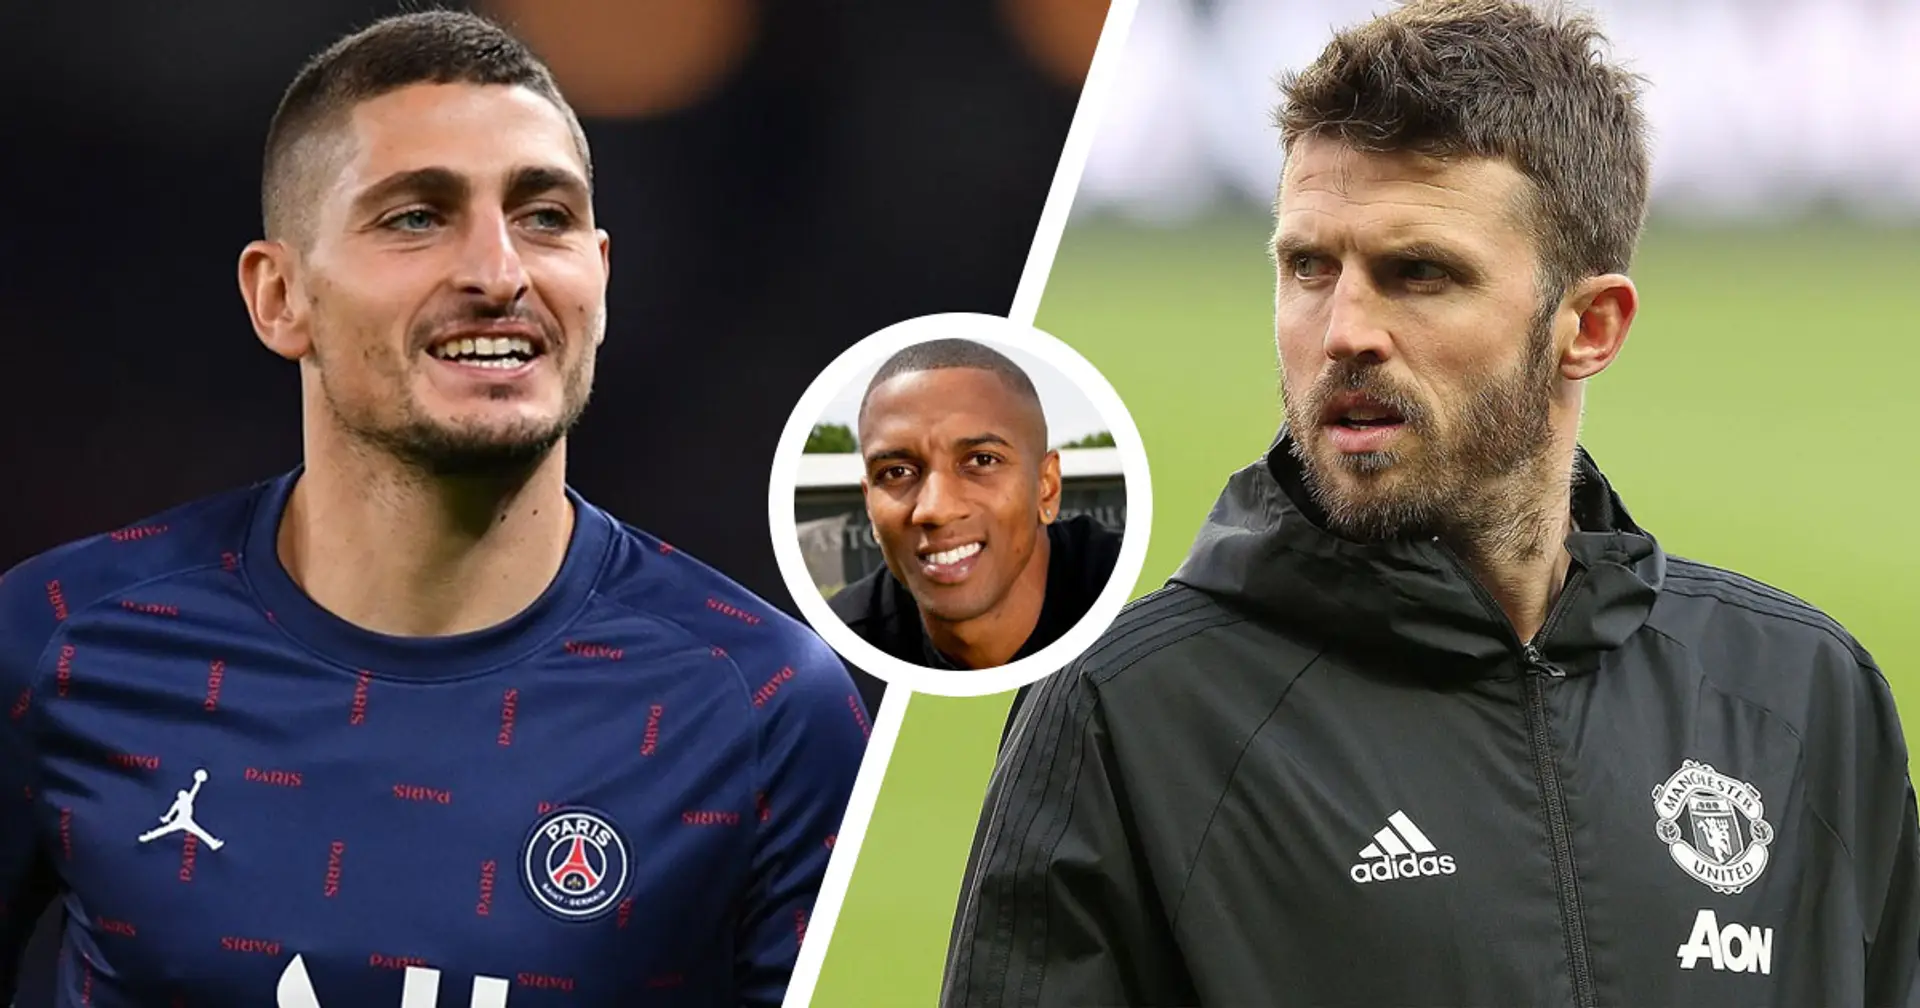 'He's the closest one to Carrick': Young insists Marco Veratti would be an ‘unbelievable signing’ for United